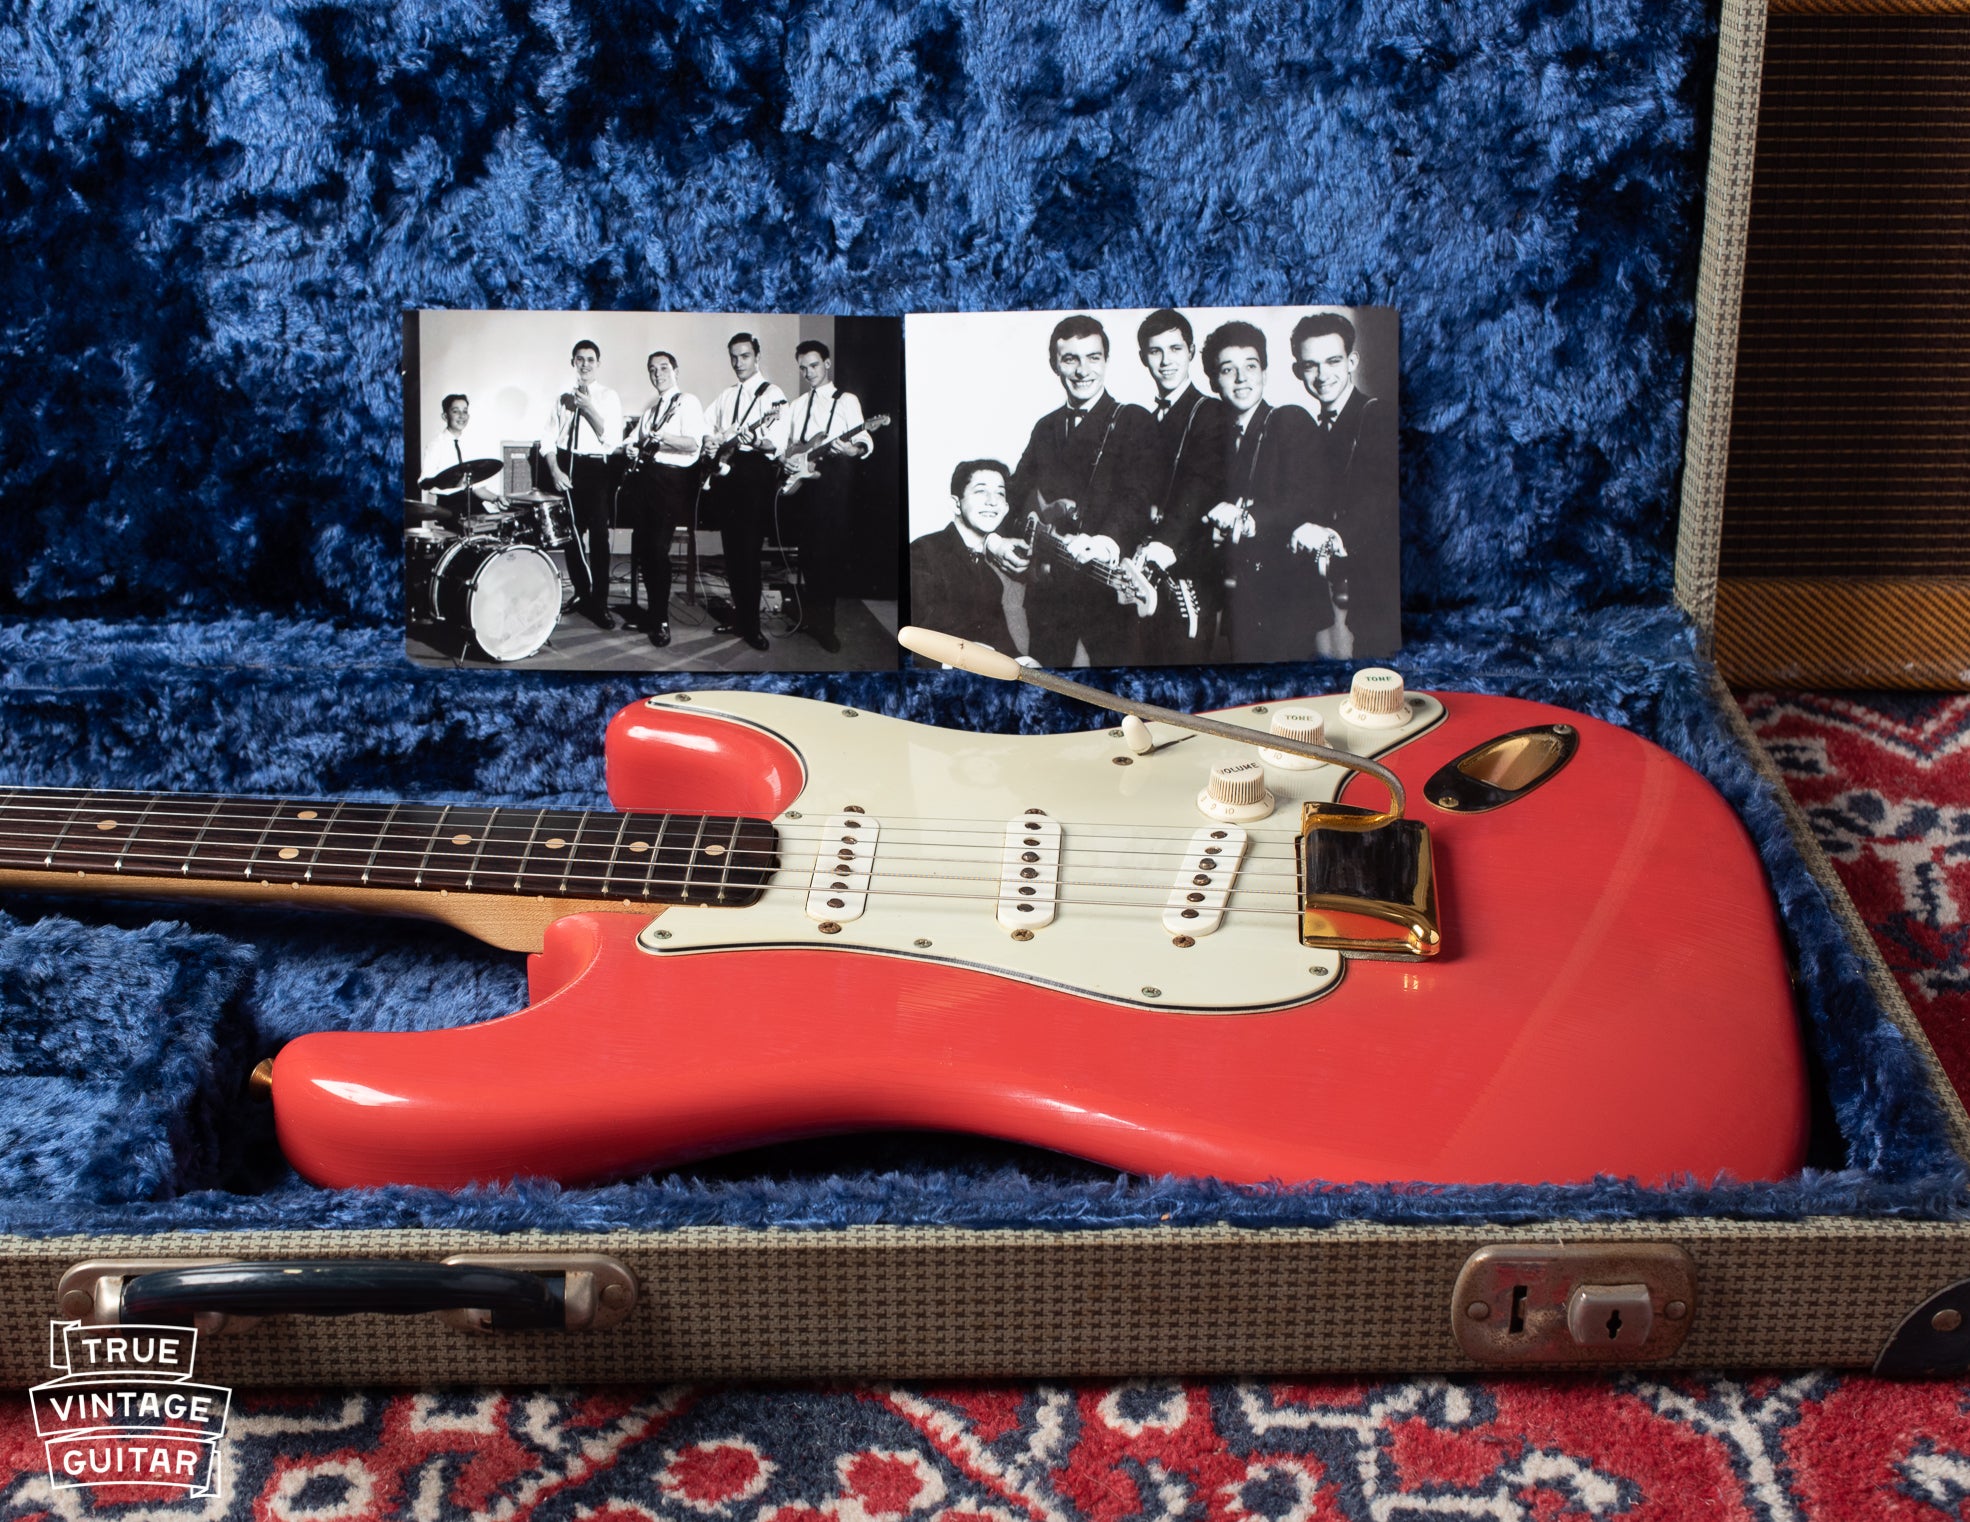 1962 Fender Stratocaster Fiesta Red with pictures of its original owner